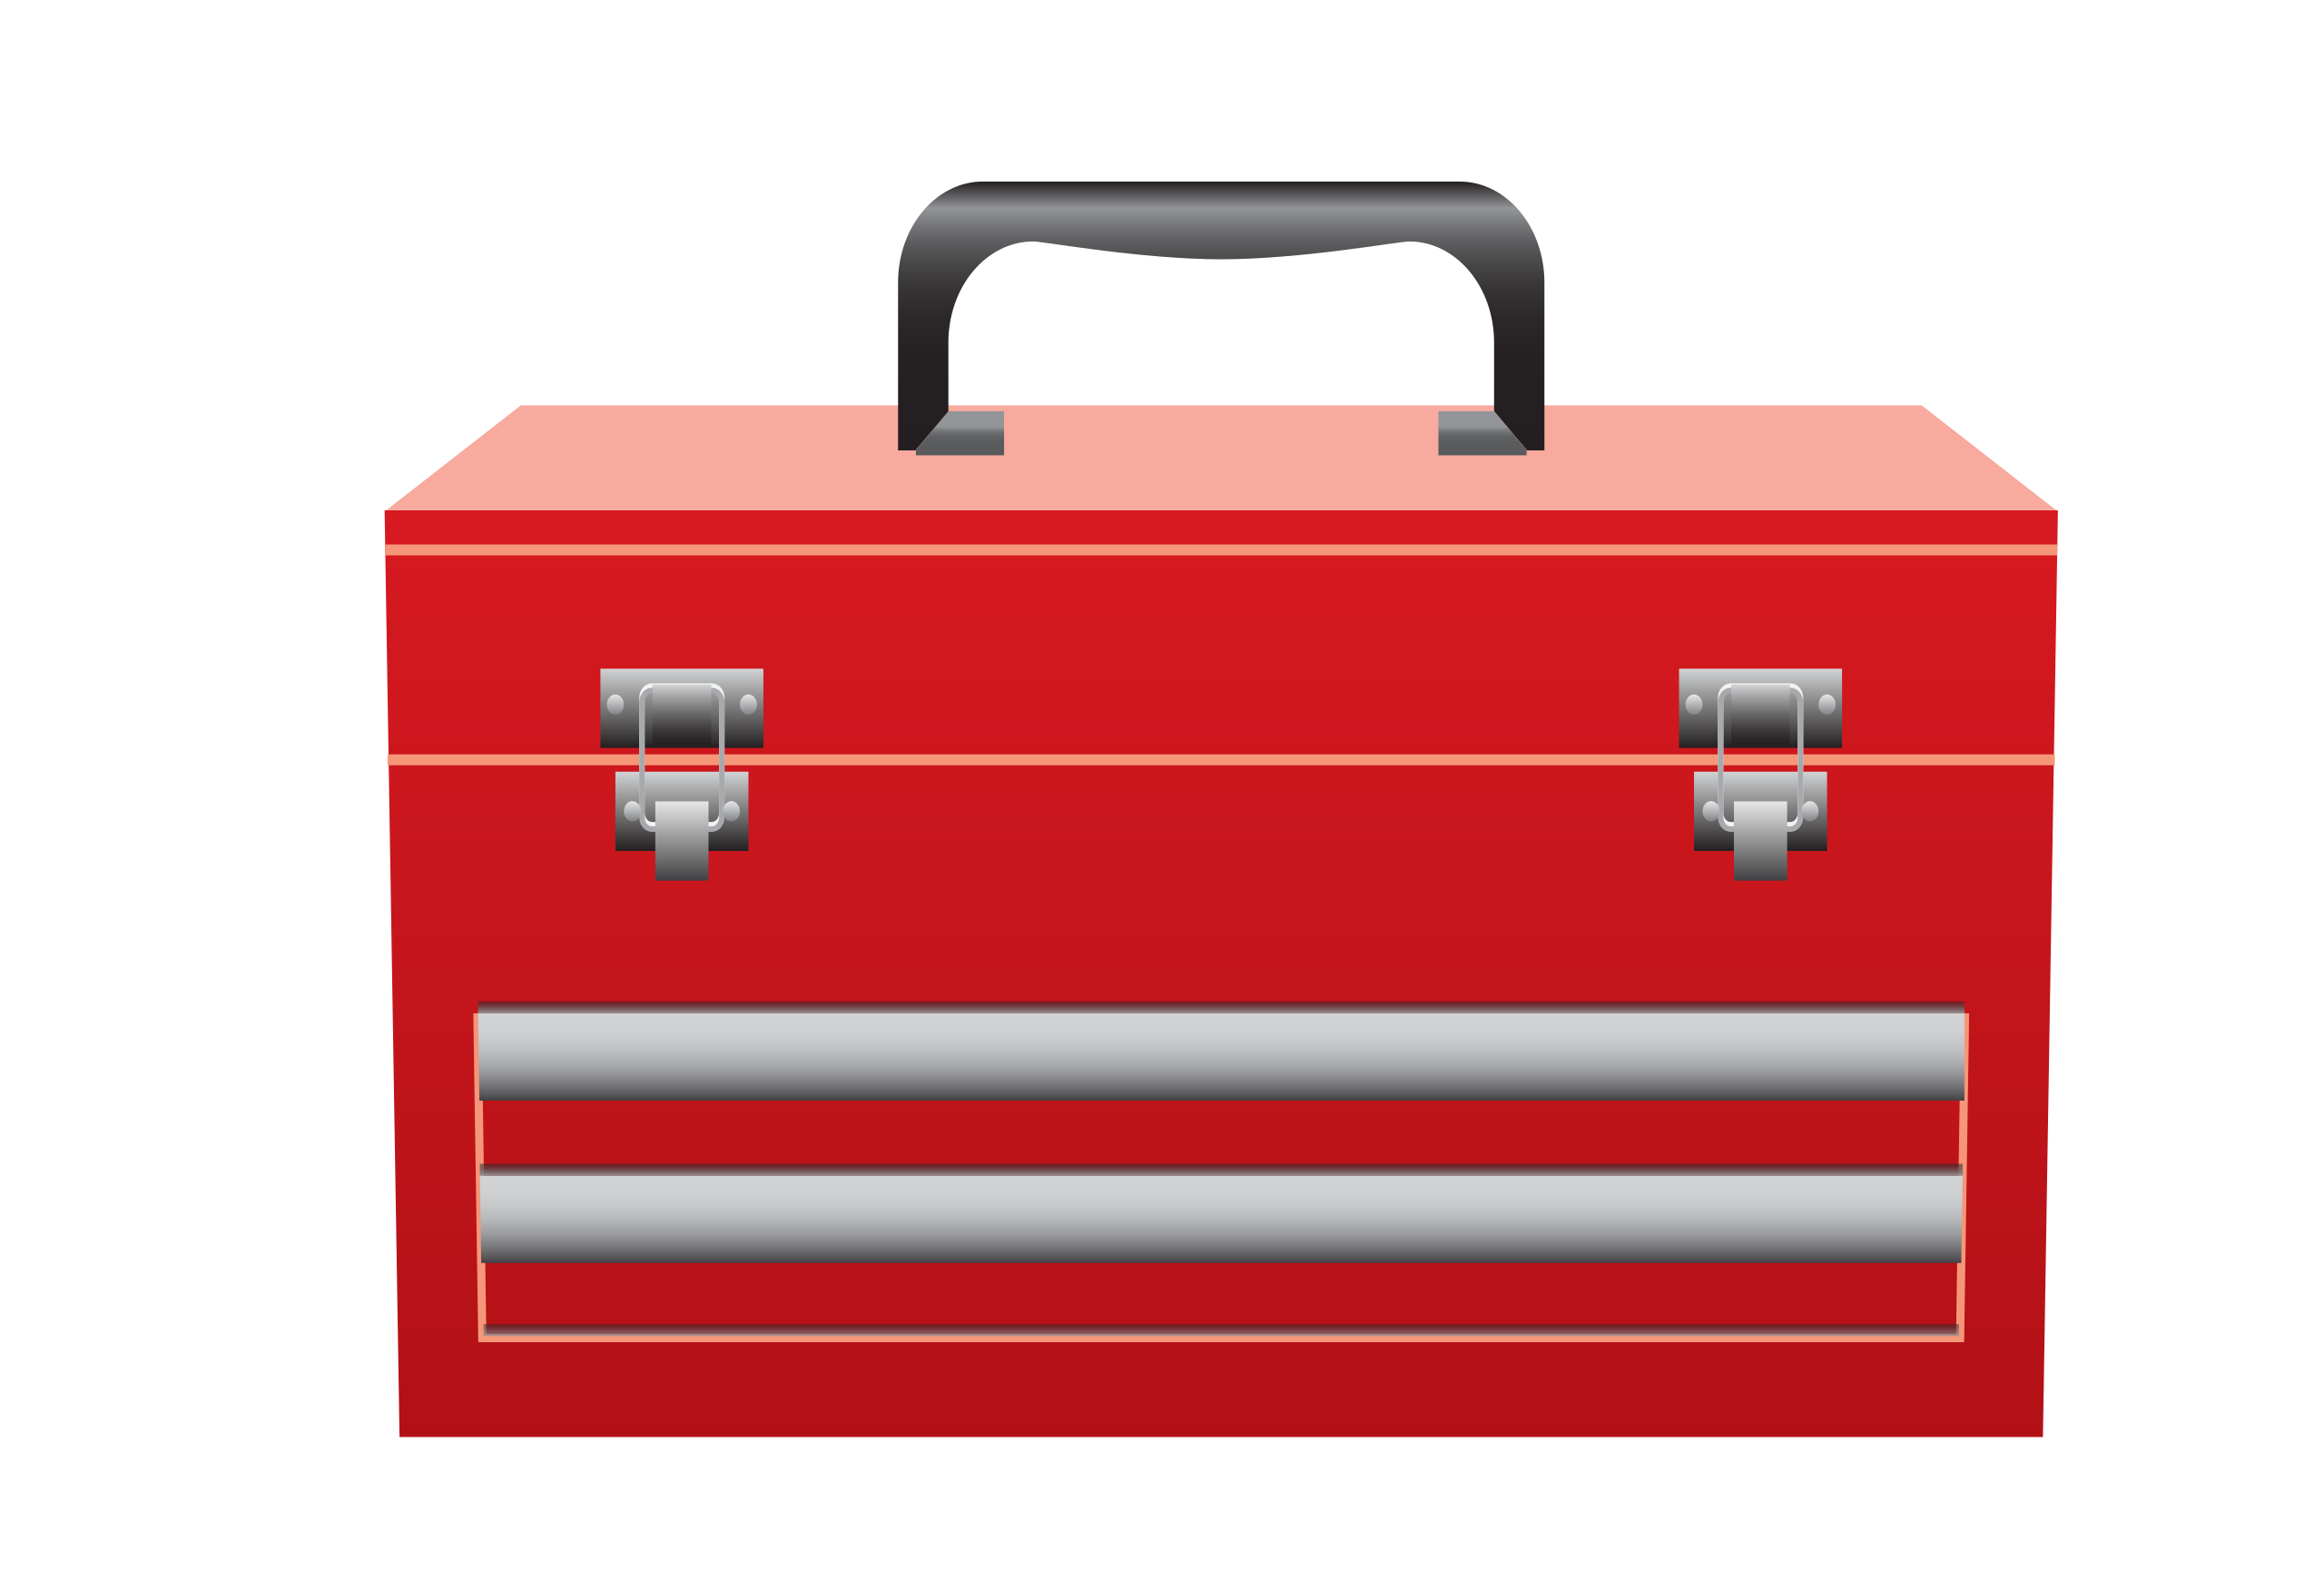 File:Red toolbox.svg - Wikimedia Commons